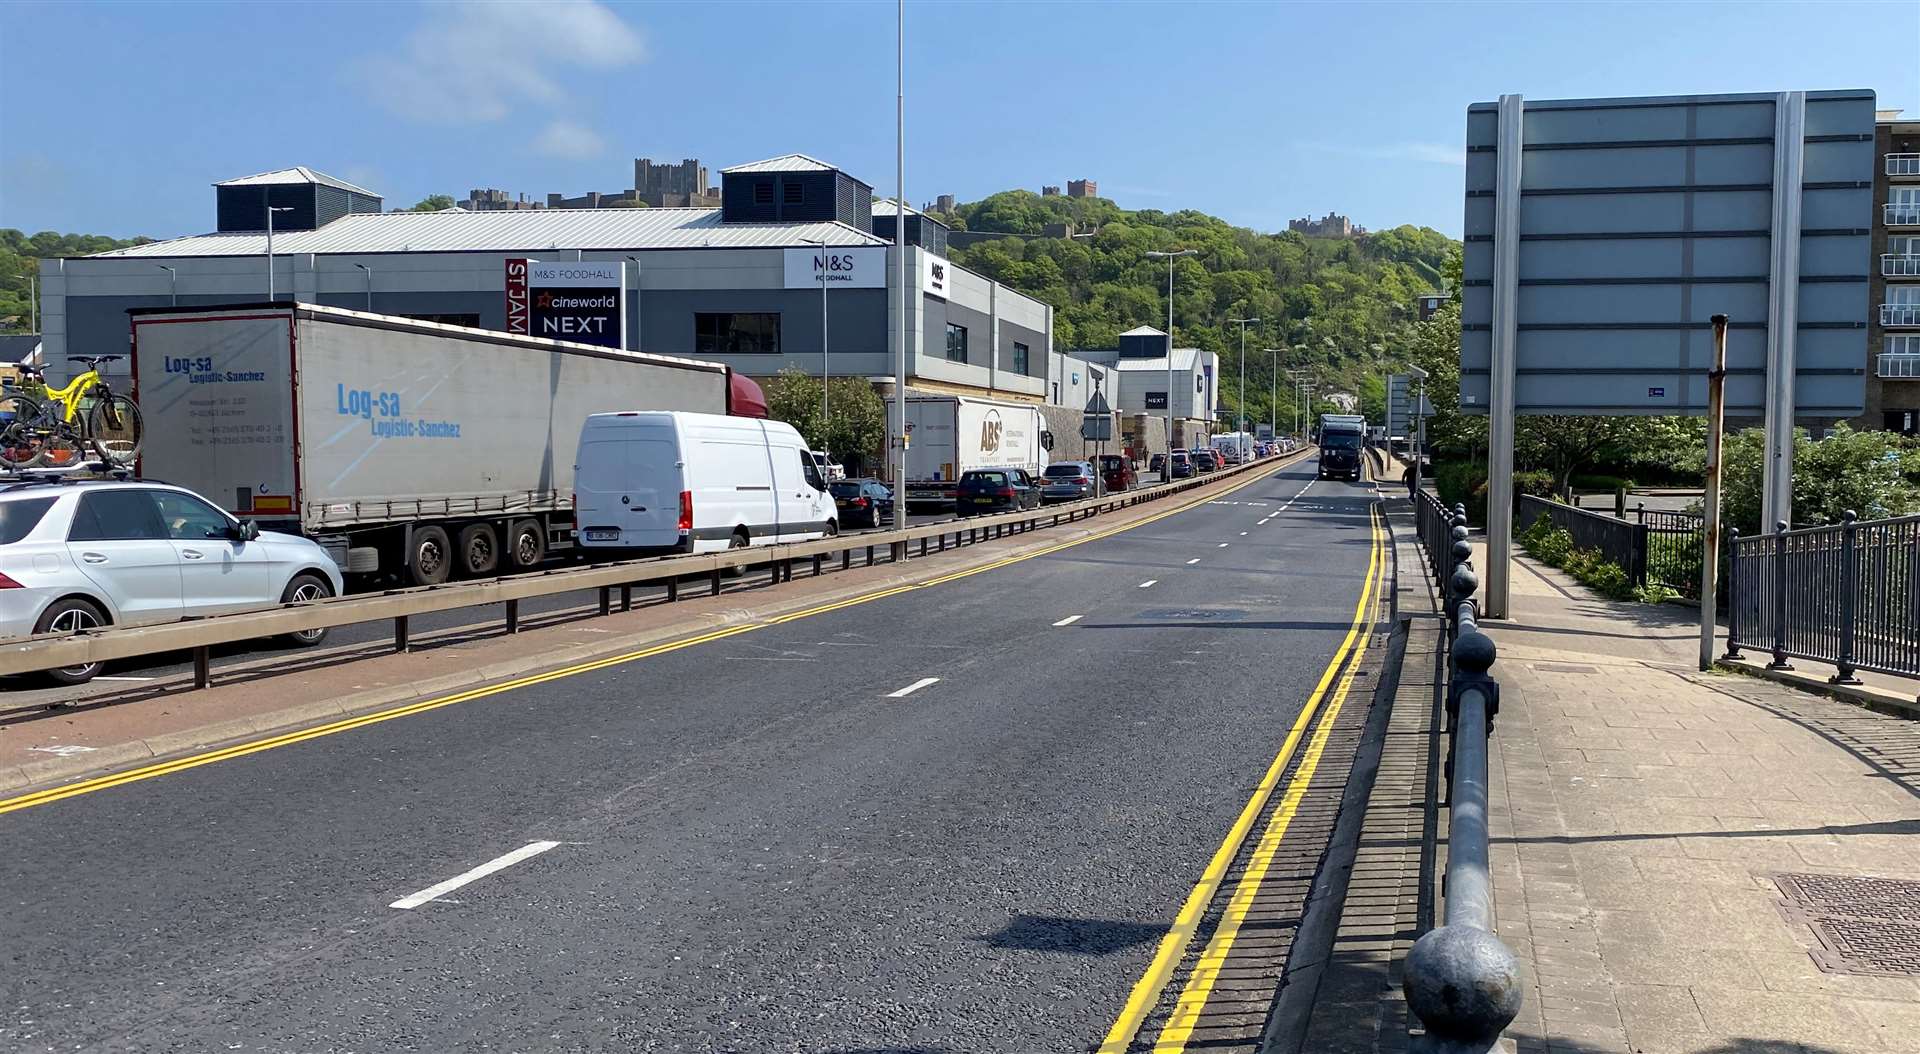 Traffic is building up in Dover town centre due to delays at the port